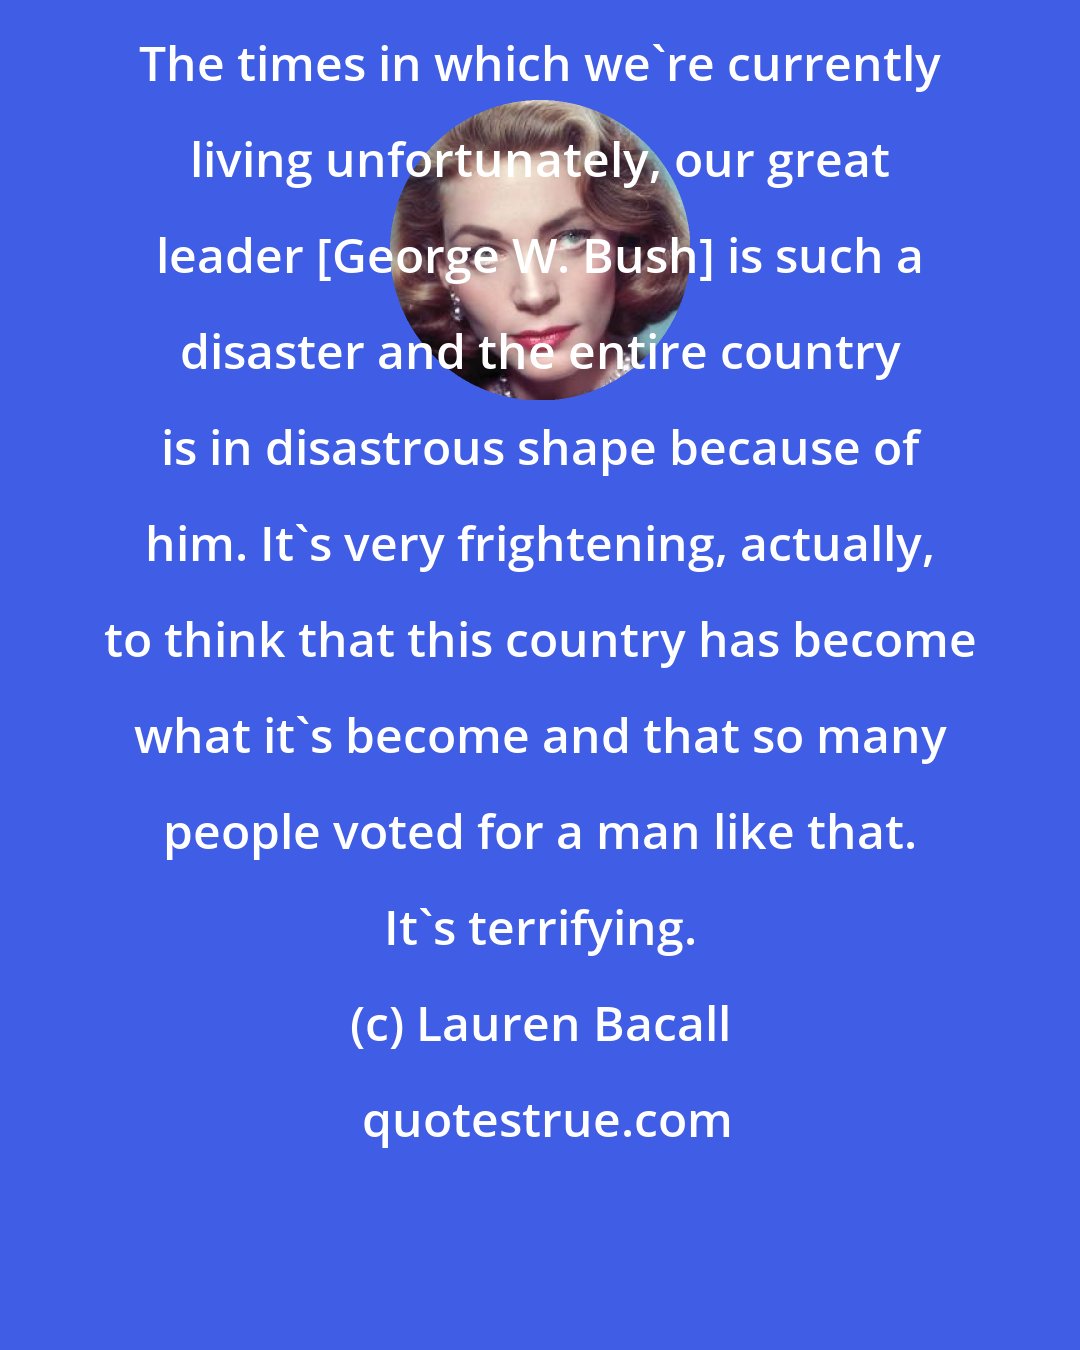 Lauren Bacall: The times in which we're currently living unfortunately, our great leader [George W. Bush] is such a disaster and the entire country is in disastrous shape because of him. It's very frightening, actually, to think that this country has become what it's become and that so many people voted for a man like that. It's terrifying.